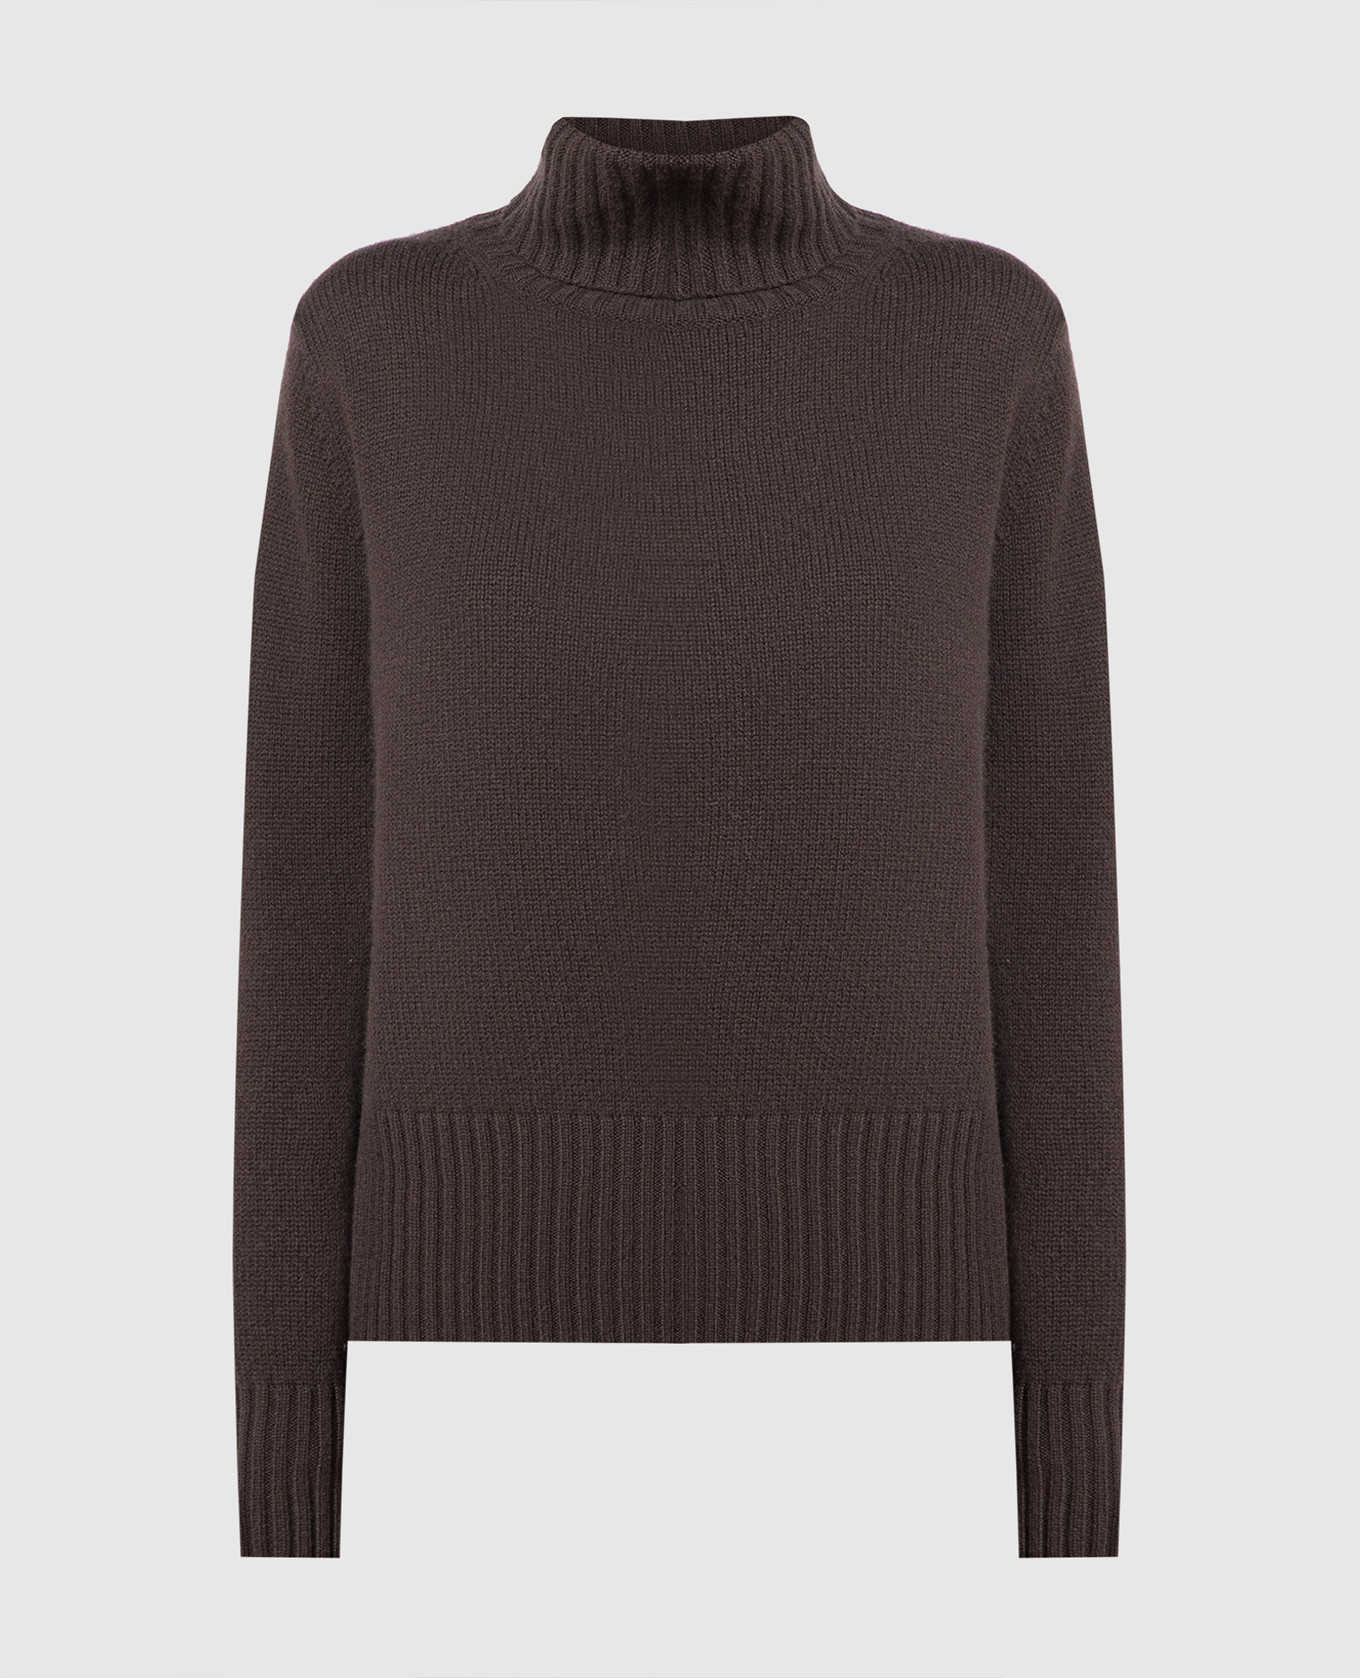 Brown wool and cashmere sweater